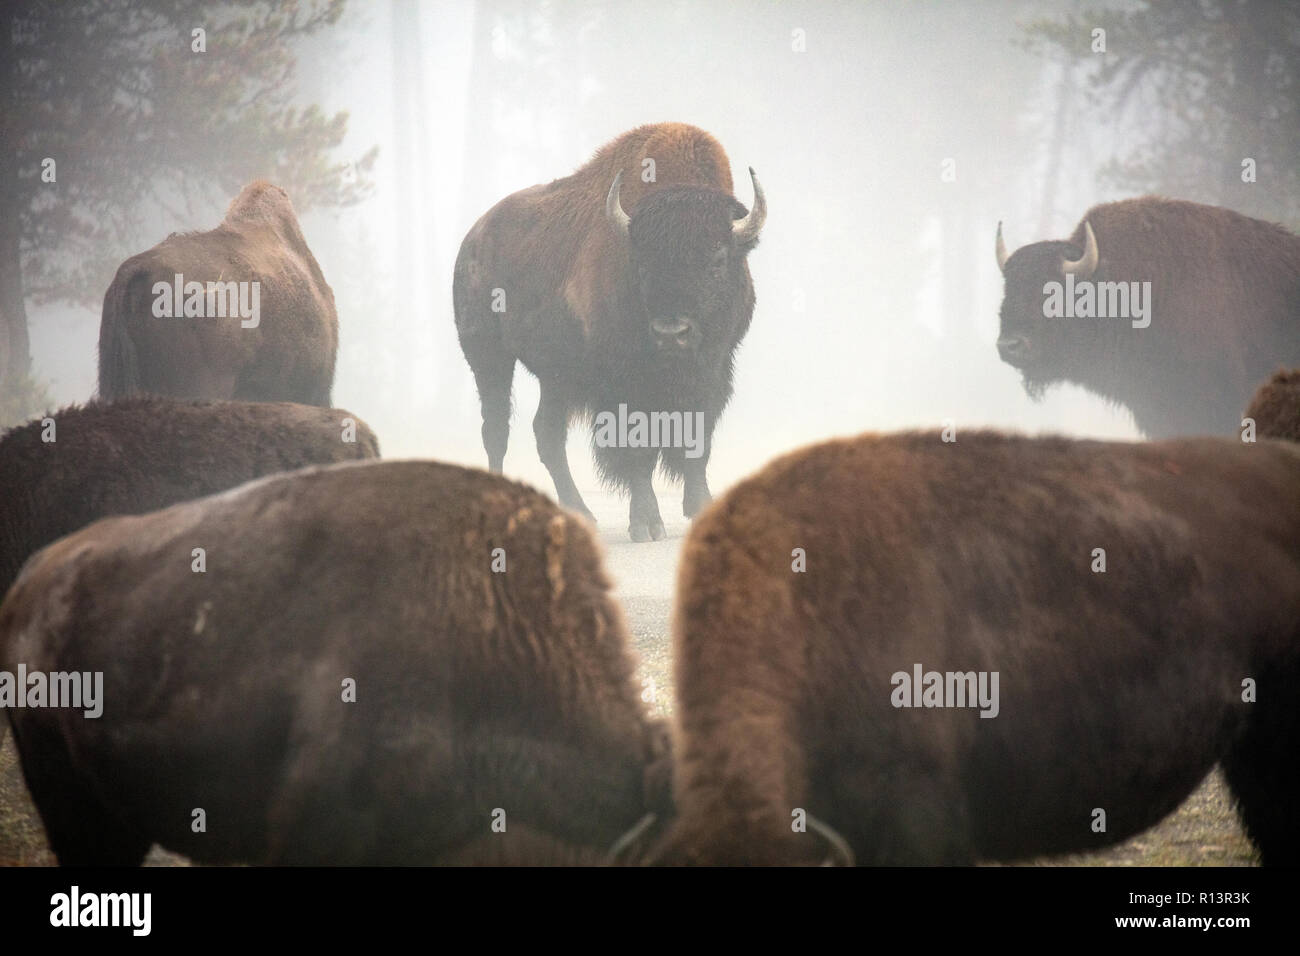 WY03525-00...WYOMING - Bison in the fog near Madison Junction of Yellowstone National Park. Stock Photo